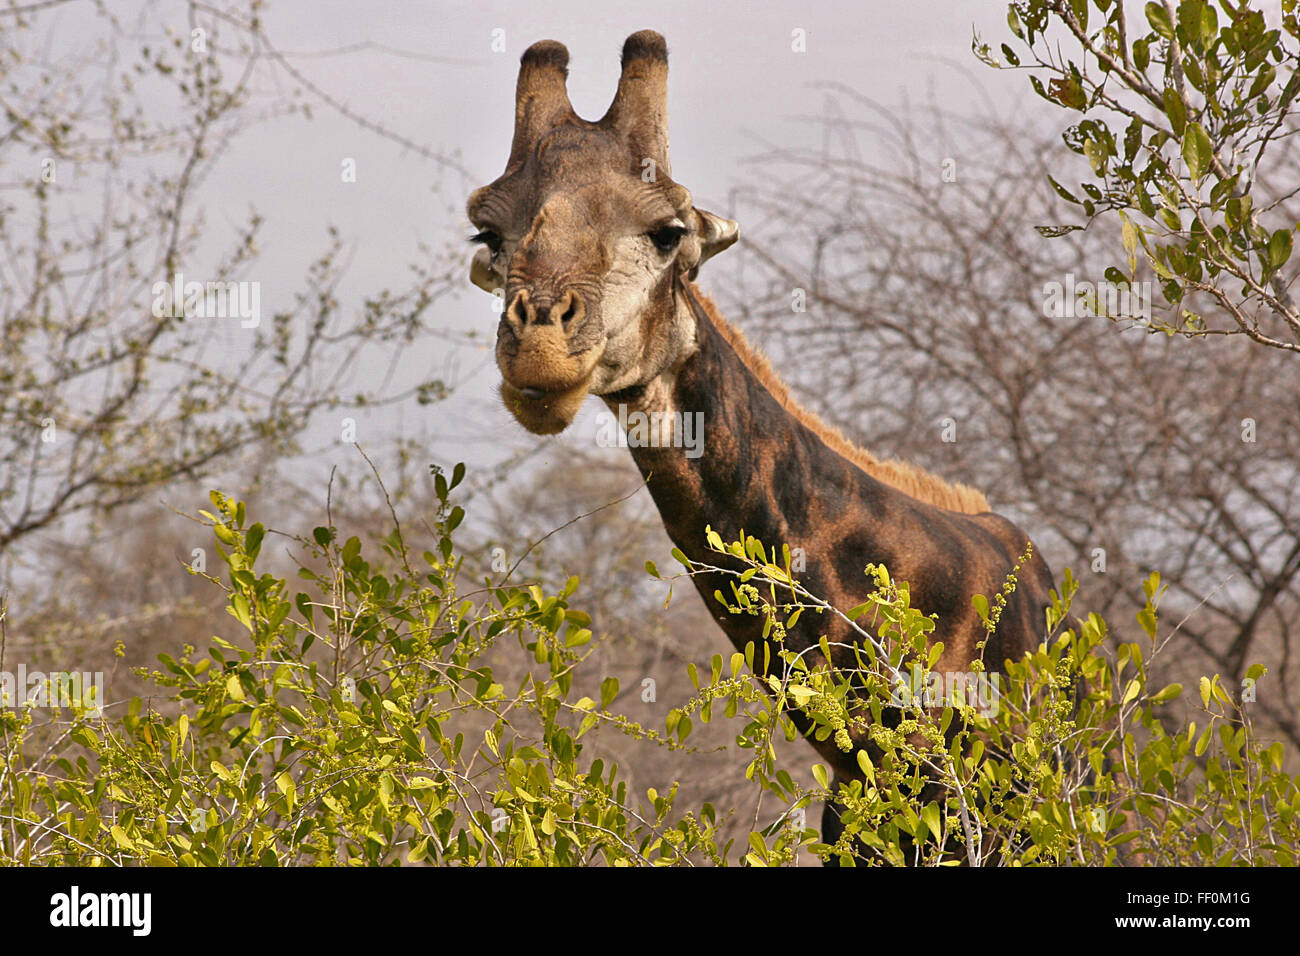 A giraffe leaning over some trees to eat in South Africa's Kruger National Park. Stock Photo